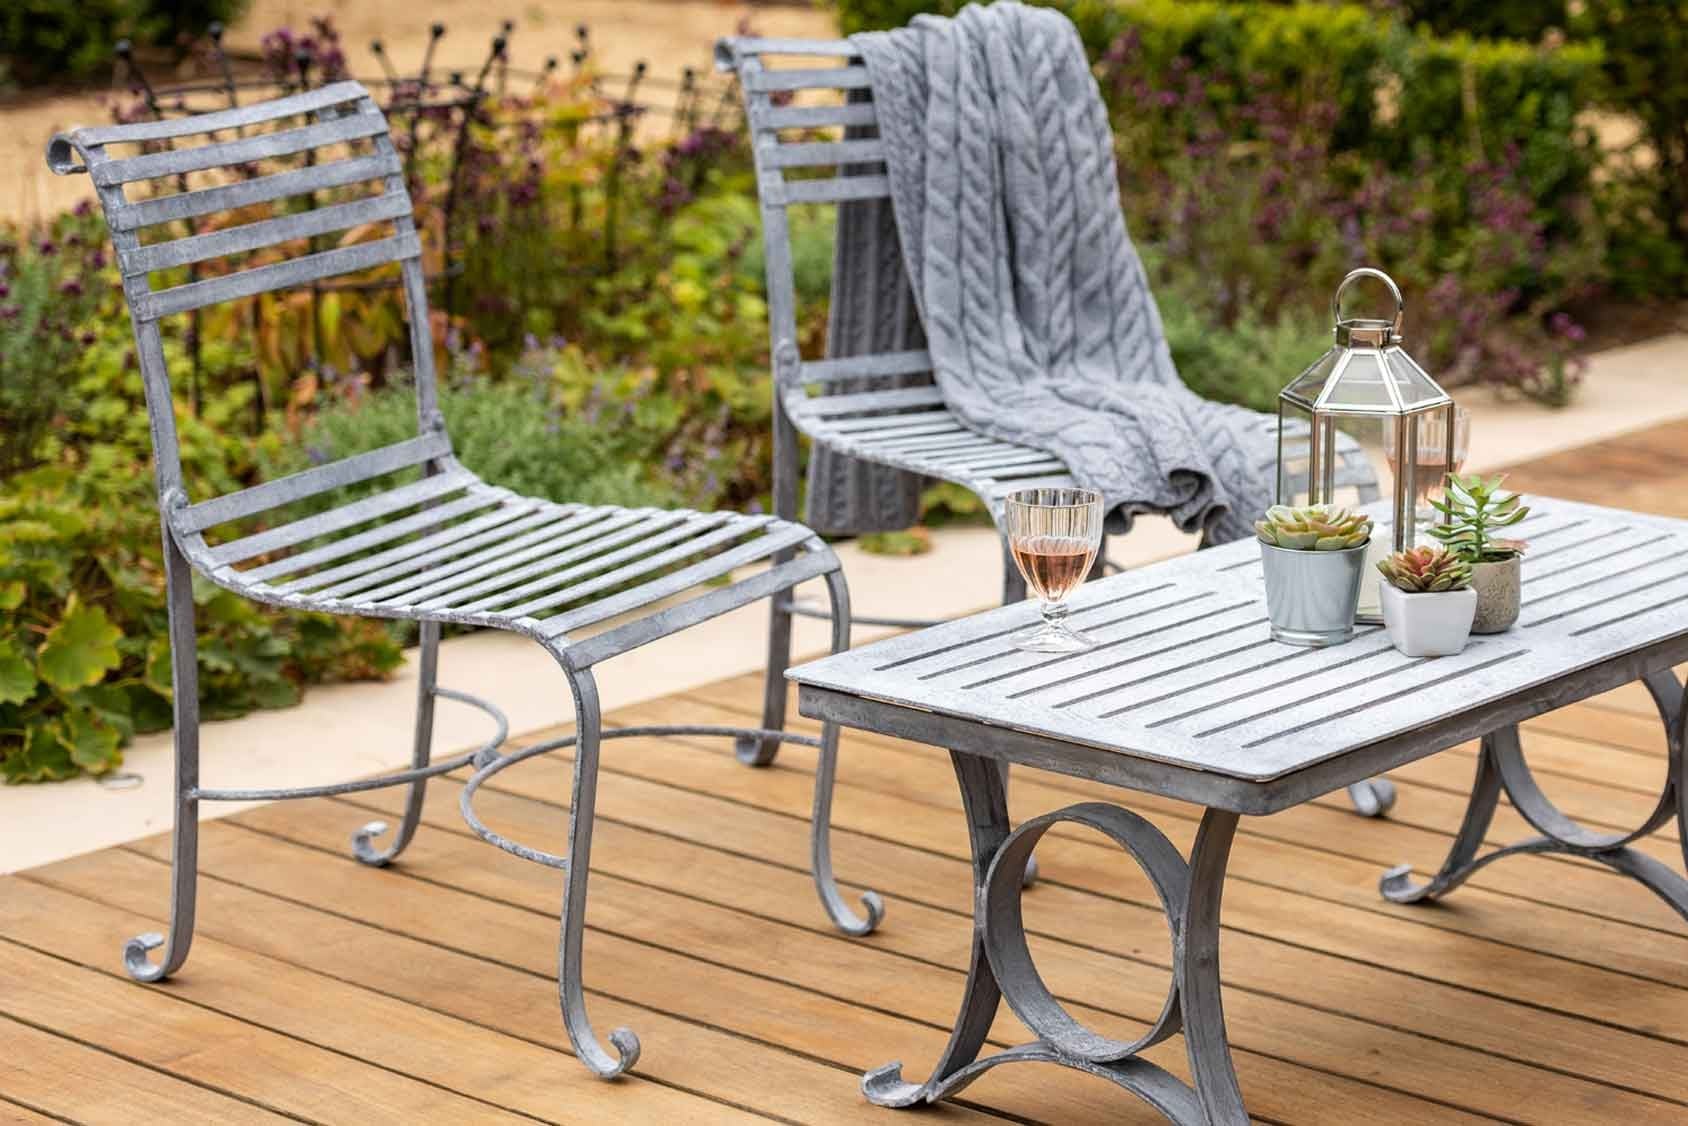 Handcrafted Steel Garden Chair - No Arm Rests - The Southwold Collection by Harrod Horticultural